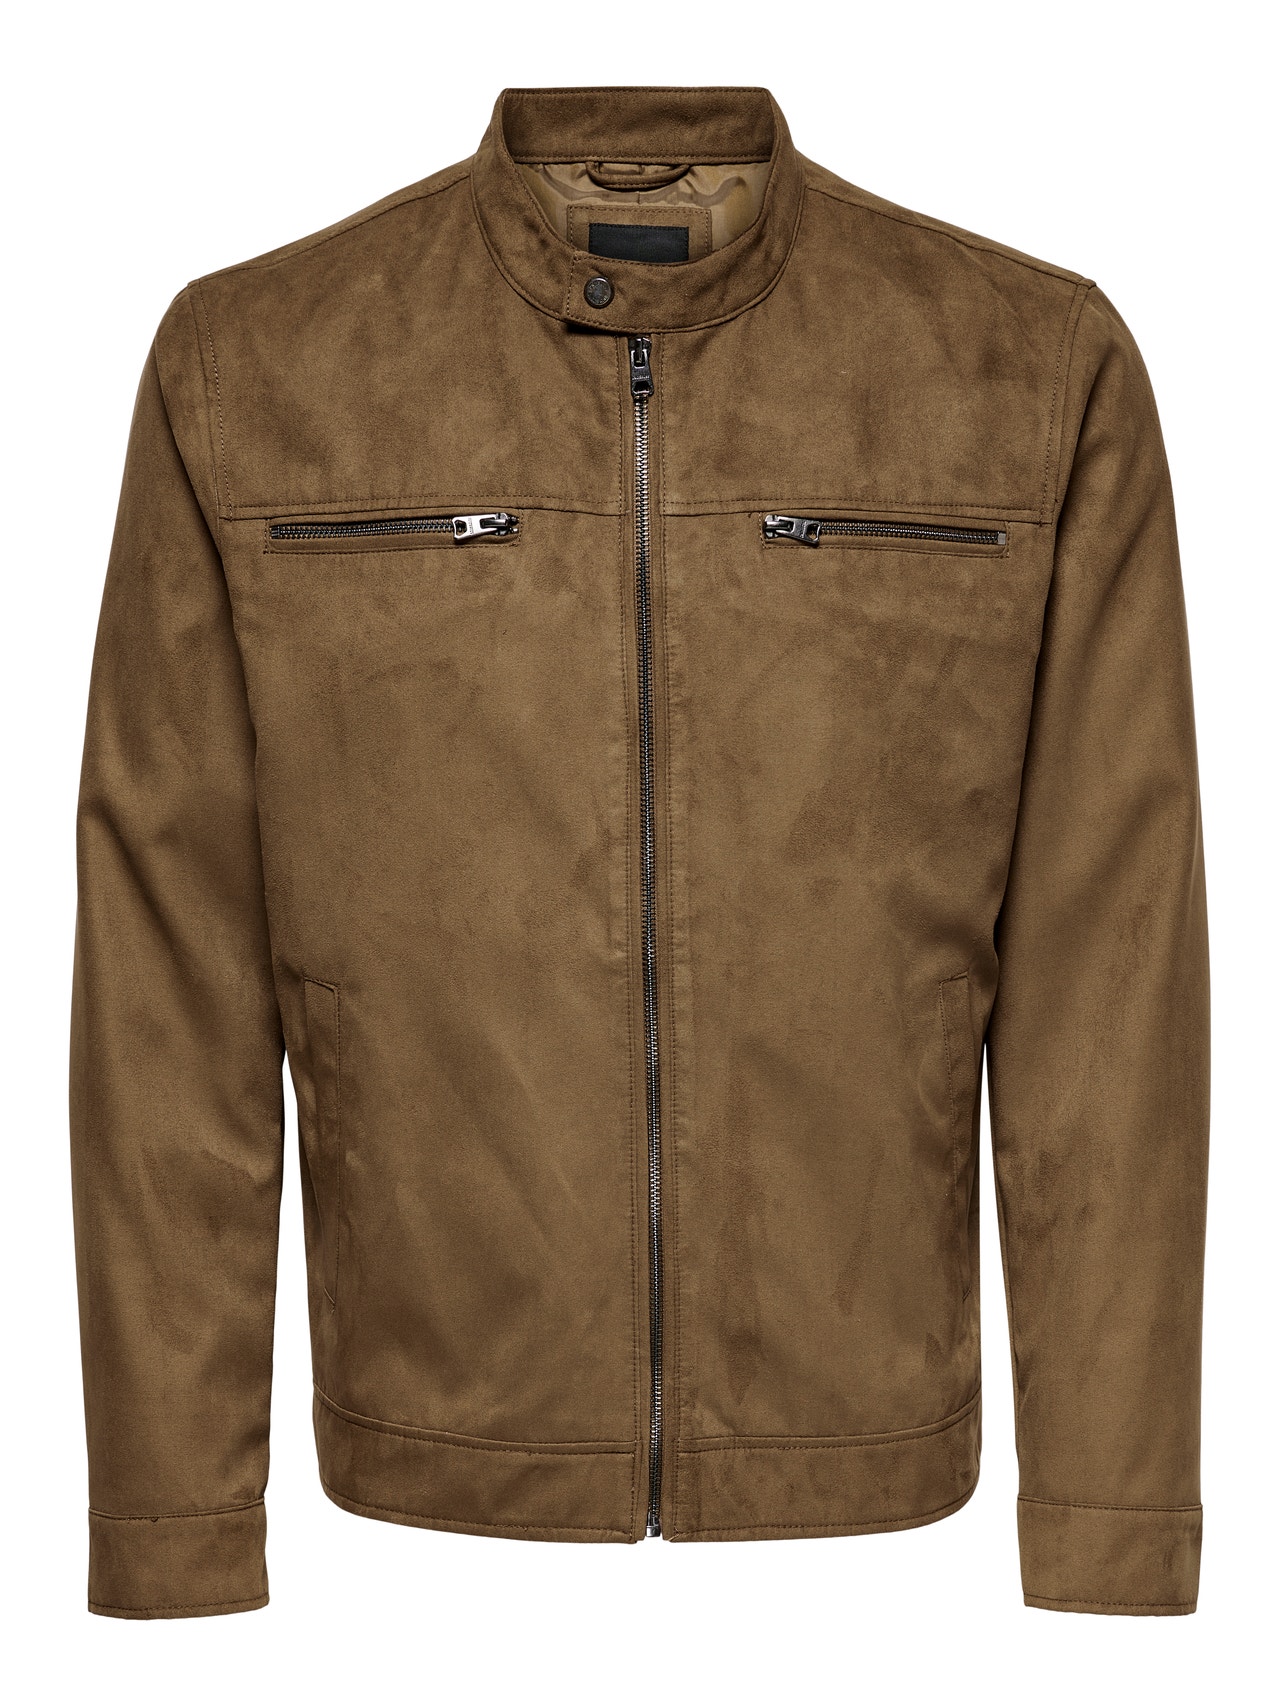 ONLY & SONS Jacke -Cognac - 22021446